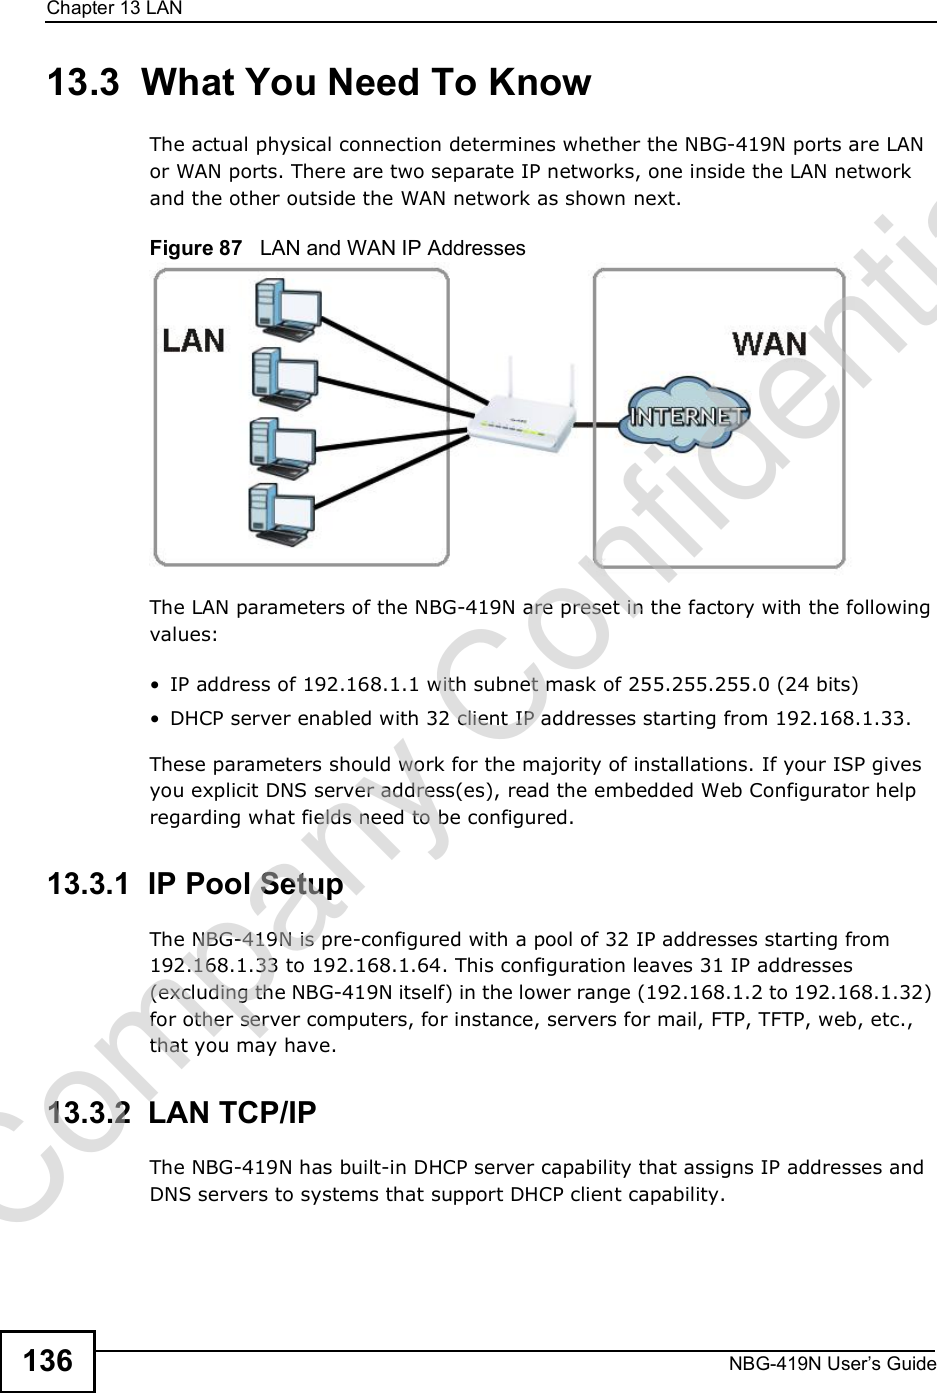 Chapter 13LANNBG-419N User s Guide13613.3  What You Need To KnowThe actual physical connection determines whether the NBG-419N ports are LAN or WAN ports. There are two separate IP networks, one inside the LAN network and the other outside the WAN network as shown next.Figure 87   LAN and WAN IP AddressesThe LAN parameters of the NBG-419N are preset in the factory with the following values: IP address of 192.168.1.1 with subnet mask of 255.255.255.0 (24 bits) DHCP server enabled with 32 client IP addresses starting from 192.168.1.33. These parameters should work for the majority of installations. If your ISP gives you explicit DNS server address(es), read the embedded Web Configurator help regarding what fields need to be configured.13.3.1  IP Pool SetupThe NBG-419N is pre-configured with a pool of 32 IP addresses starting from 192.168.1.33 to 192.168.1.64. This configuration leaves 31 IP addresses (excluding the NBG-419N itself) in the lower range (192.168.1.2 to 192.168.1.32) for other server computers, for instance, servers for mail, FTP, TFTP, web, etc., that you may have.13.3.2  LAN TCP/IP The NBG-419N has built-in DHCP server capability that assigns IP addresses and DNS servers to systems that support DHCP client capability.Company Confidential